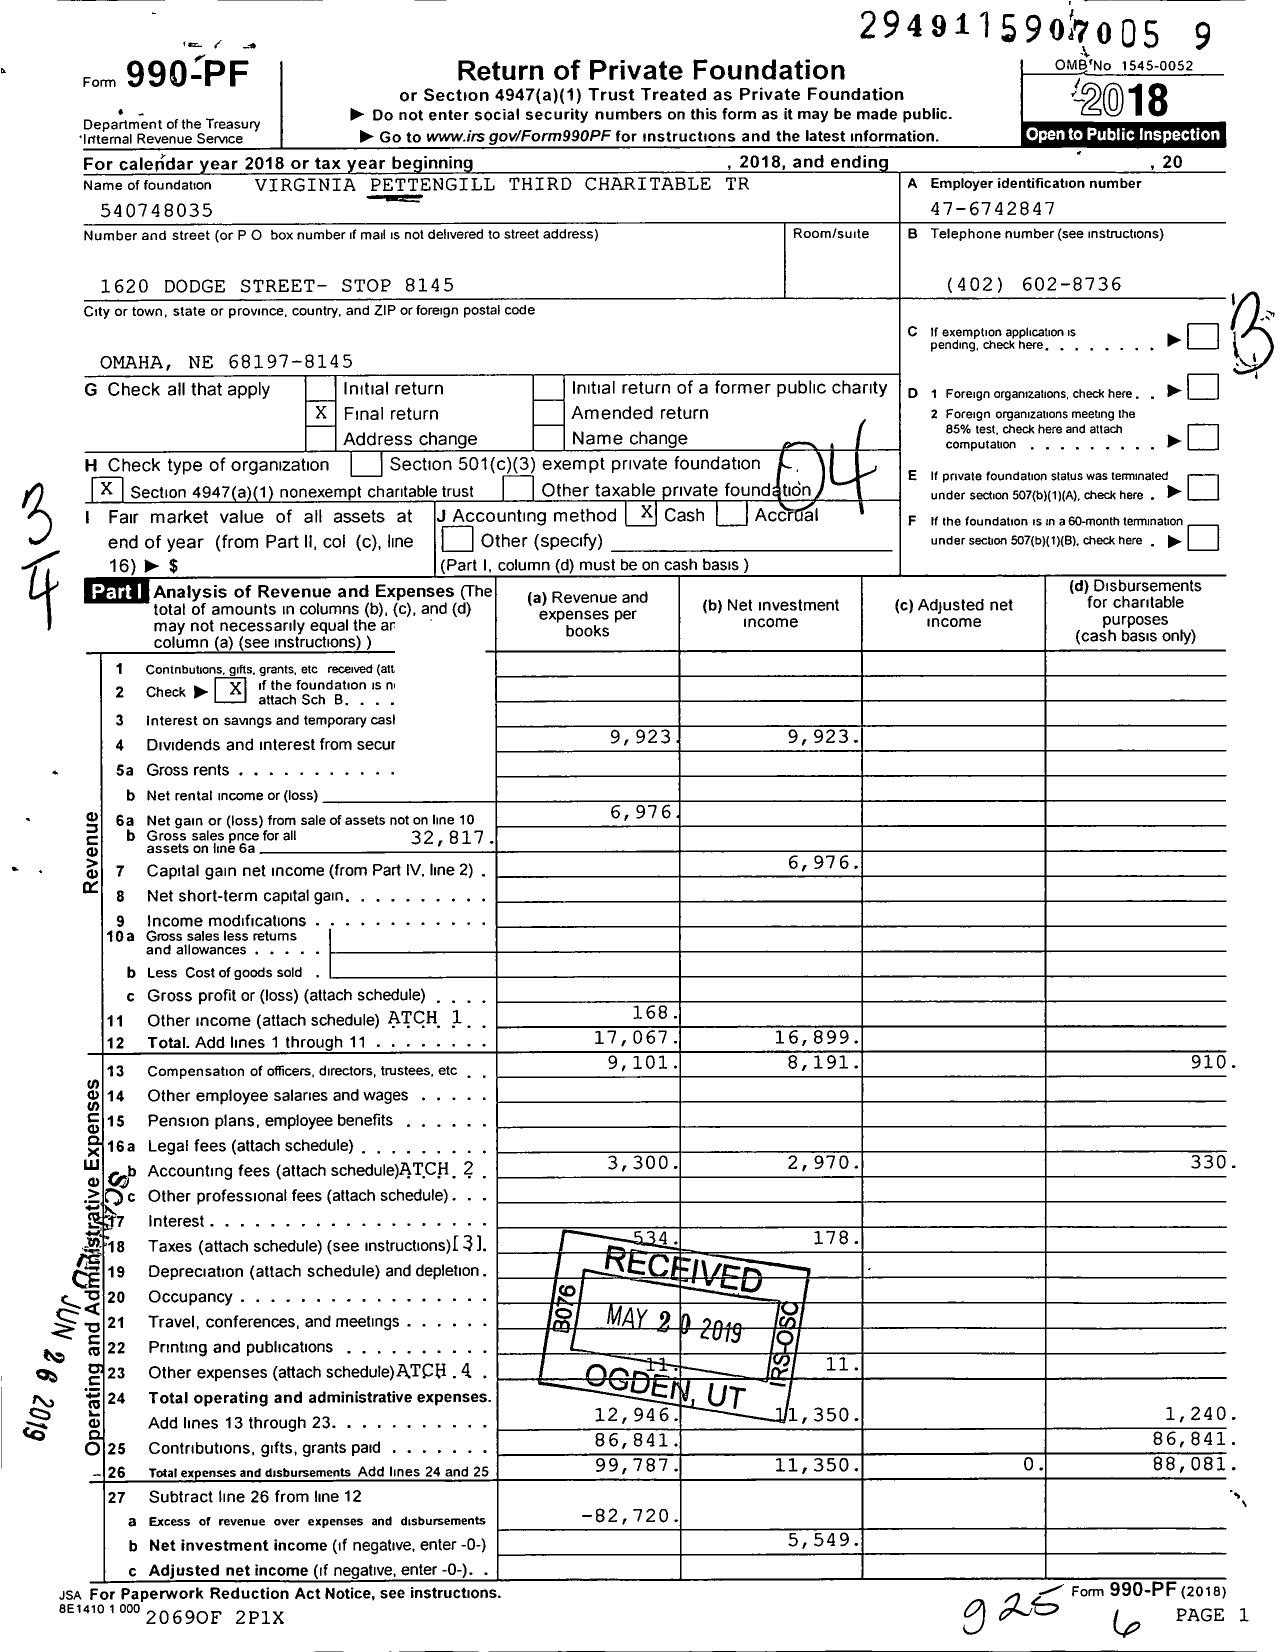 Image of first page of 2018 Form 990PF for Virginia Pettengill Third Charitable Tr